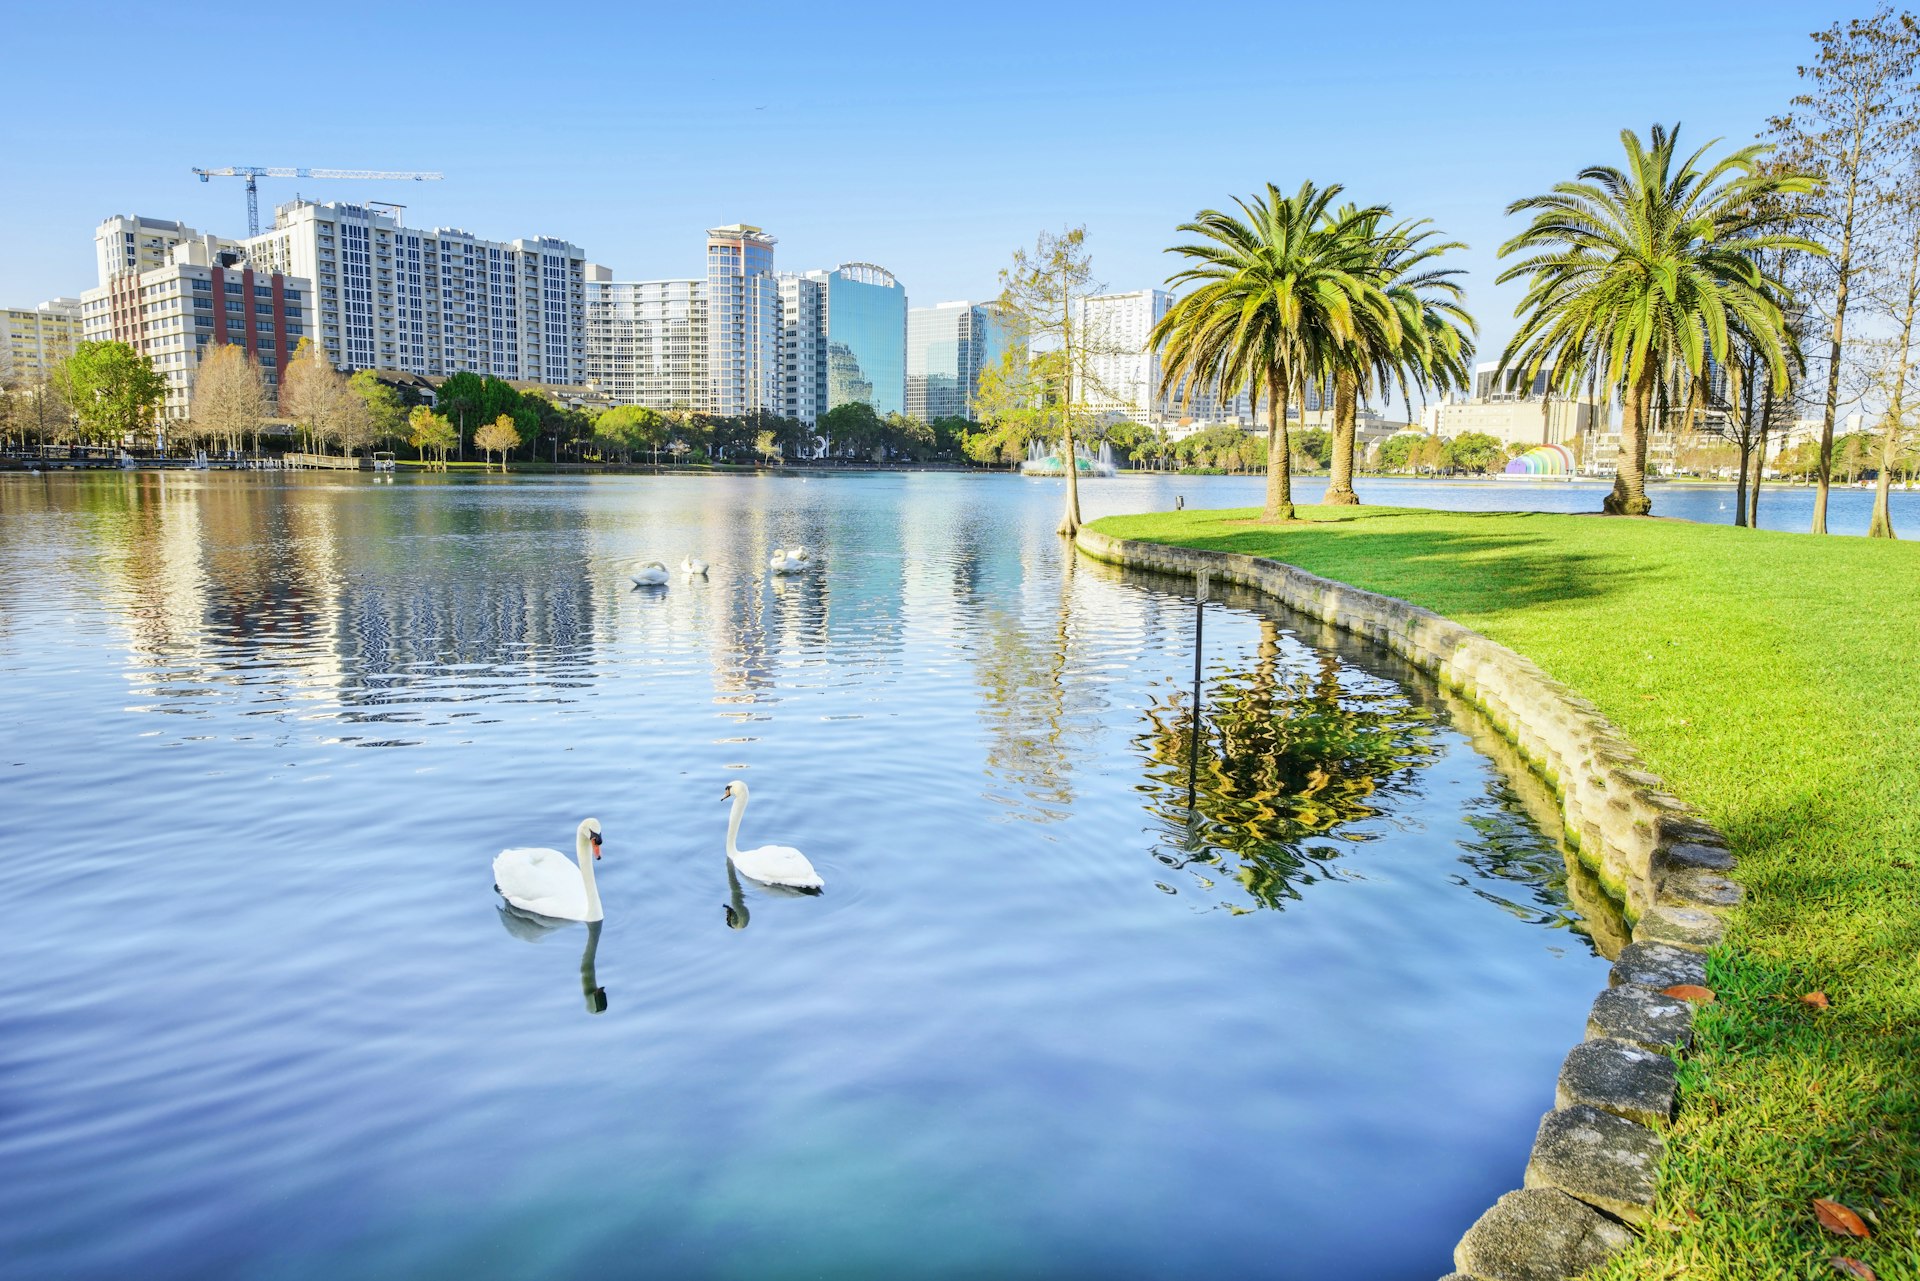 Swans swim on glassy water at Lake Eola Park, with Orlando's skyline in the background